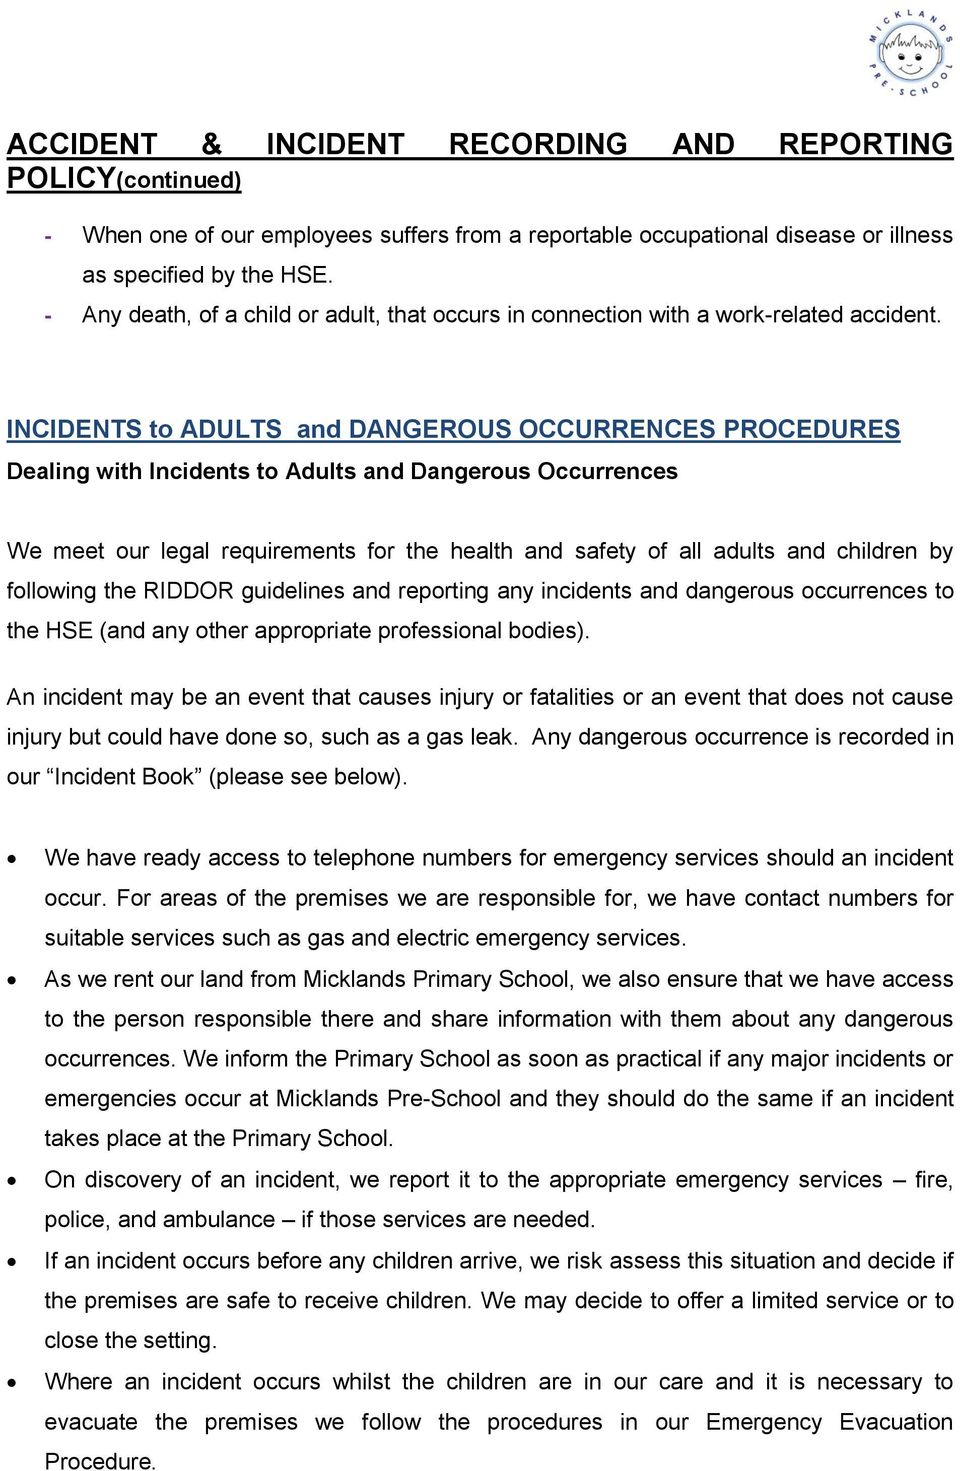 by following the RIDDOR guidelines and reporting any incidents and dangerous occurrences to the HSE (and any other appropriate professional bodies).